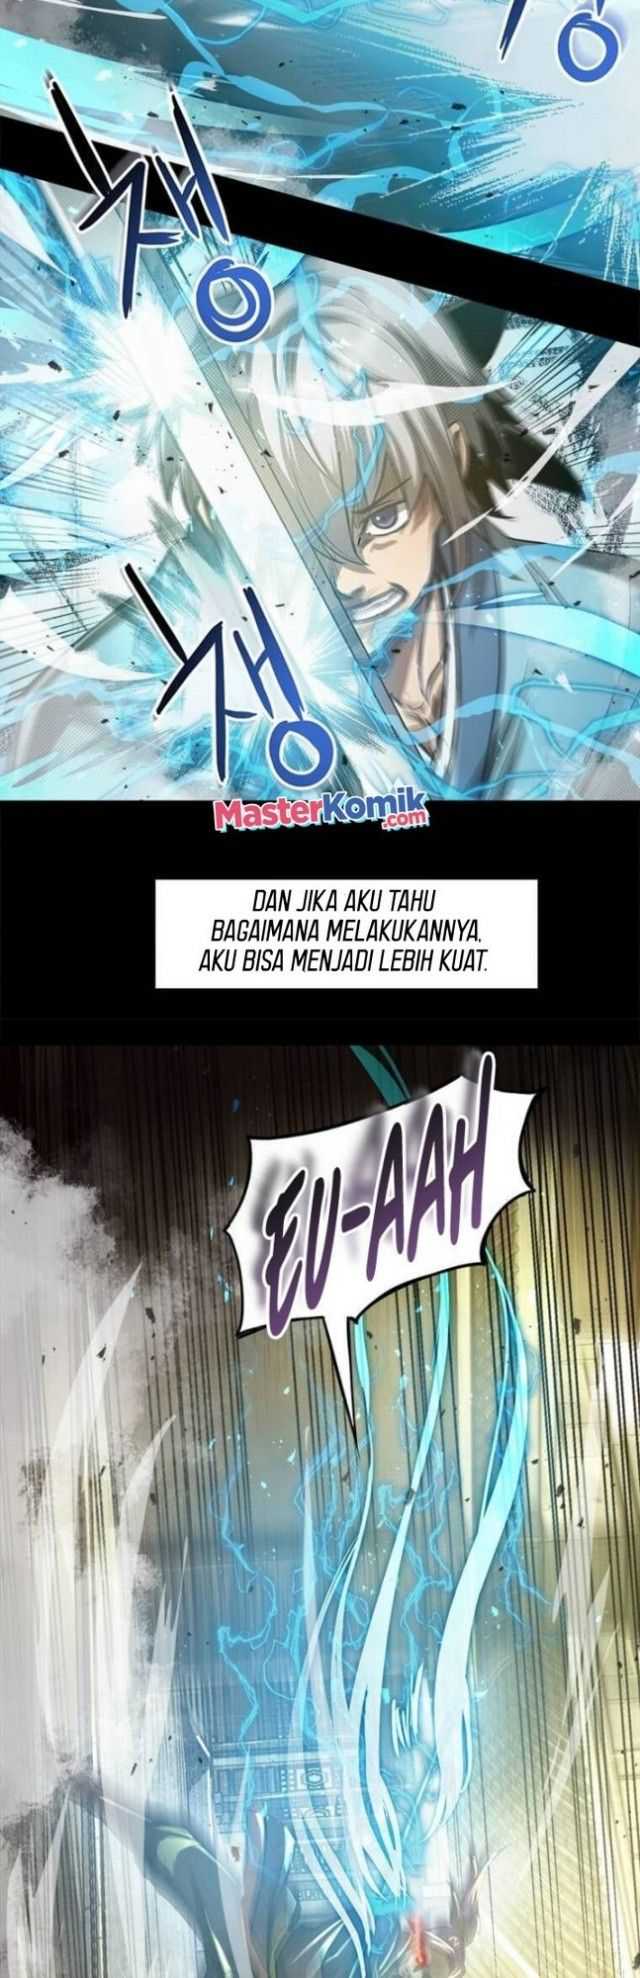 Strongest Fighter Chapter 60